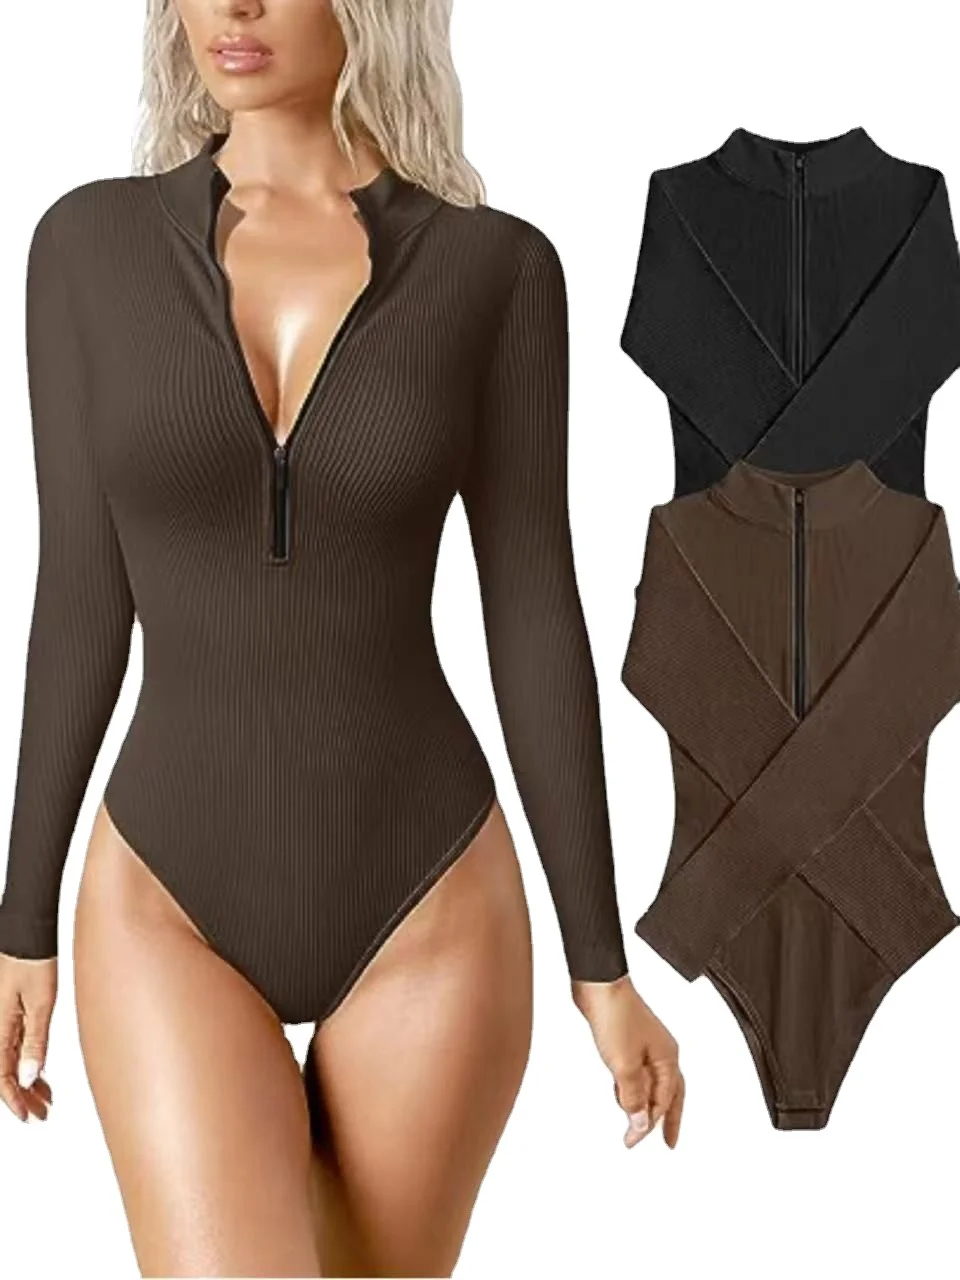 Women's Sport Jumpsuit Ribbed Tight Body Suits Sexy Outfit Fitness Workout Yoga Long Sleeve Bodysuit Zipper One Piece Bodysuit tight sexy jumpsuit women invisible open crotch bodysuit sex quick pants low cut casual women yoga pants club outfits for women